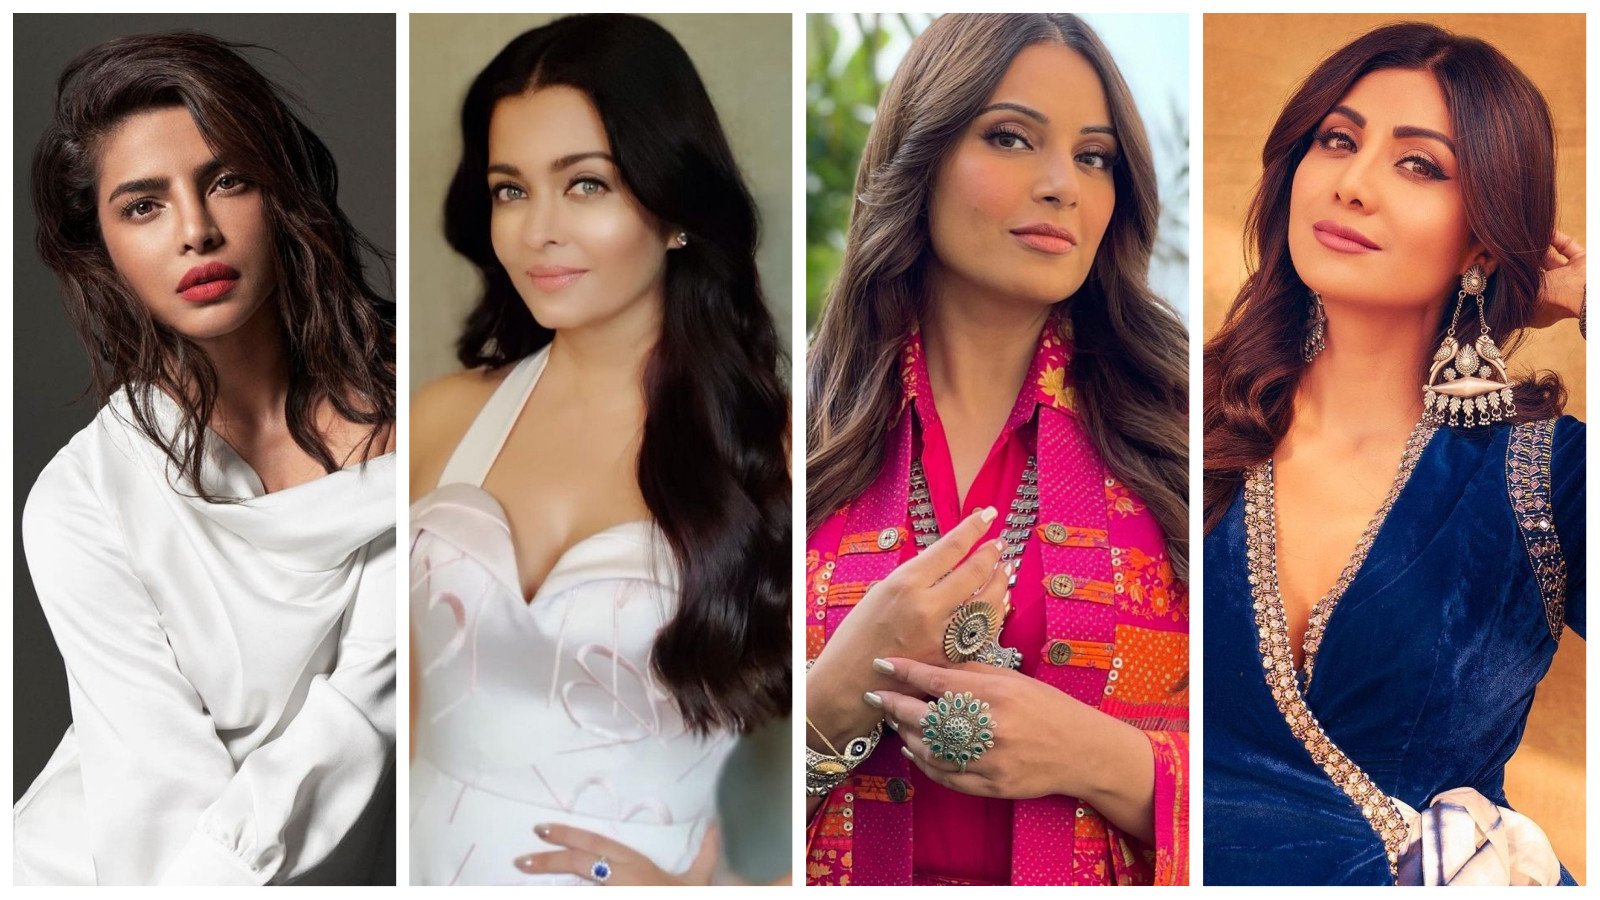 10 richest Bollywood actresses of 2021, ranked – from Hong Kong